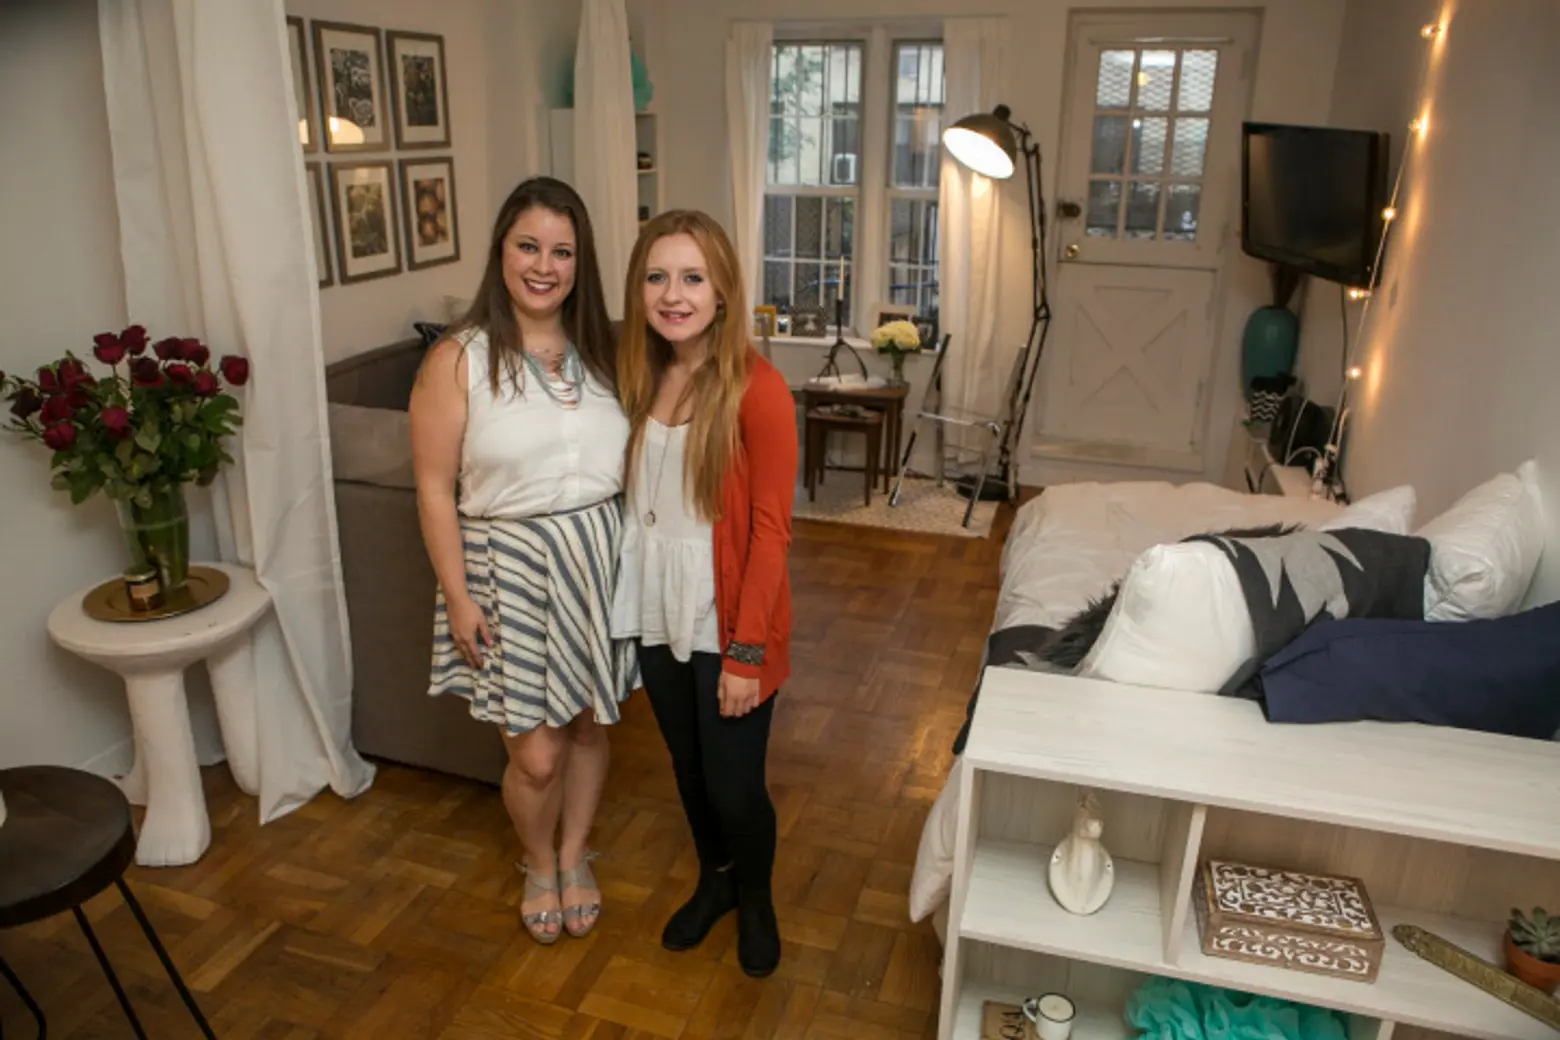 How Two Women Live Comfortably in 350 Square Feet; NYC’s Leaning Tower of Pisa?